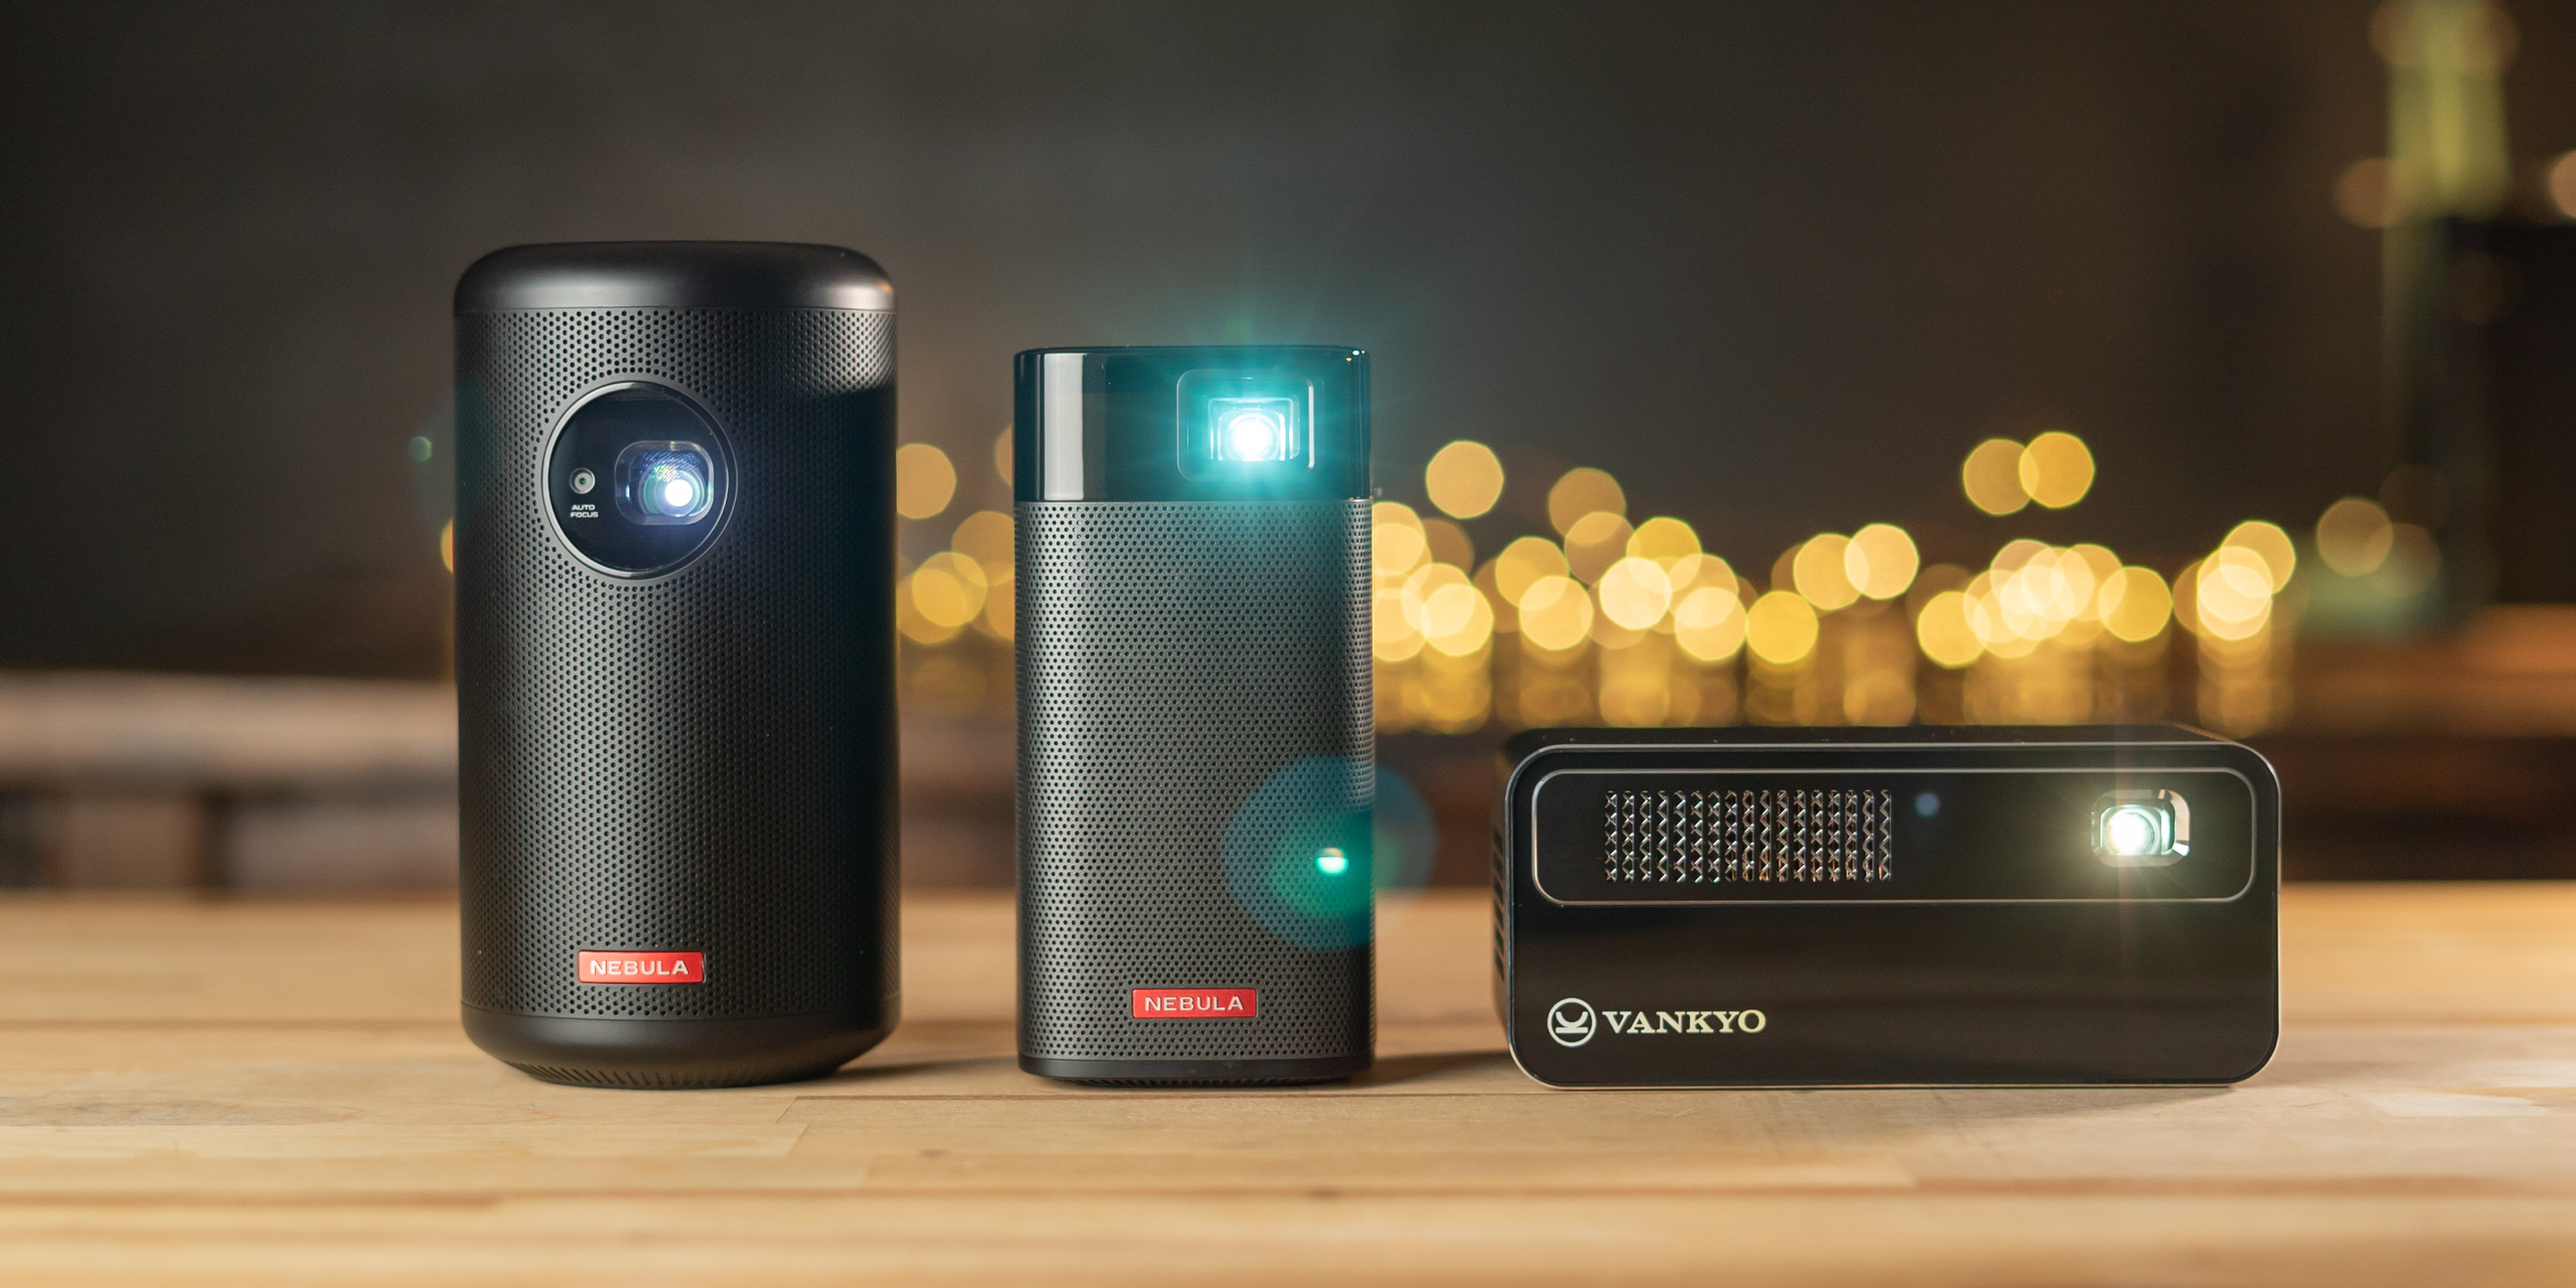 Anker Nebula Apollo Portable Projector Review: Pack a TV in your